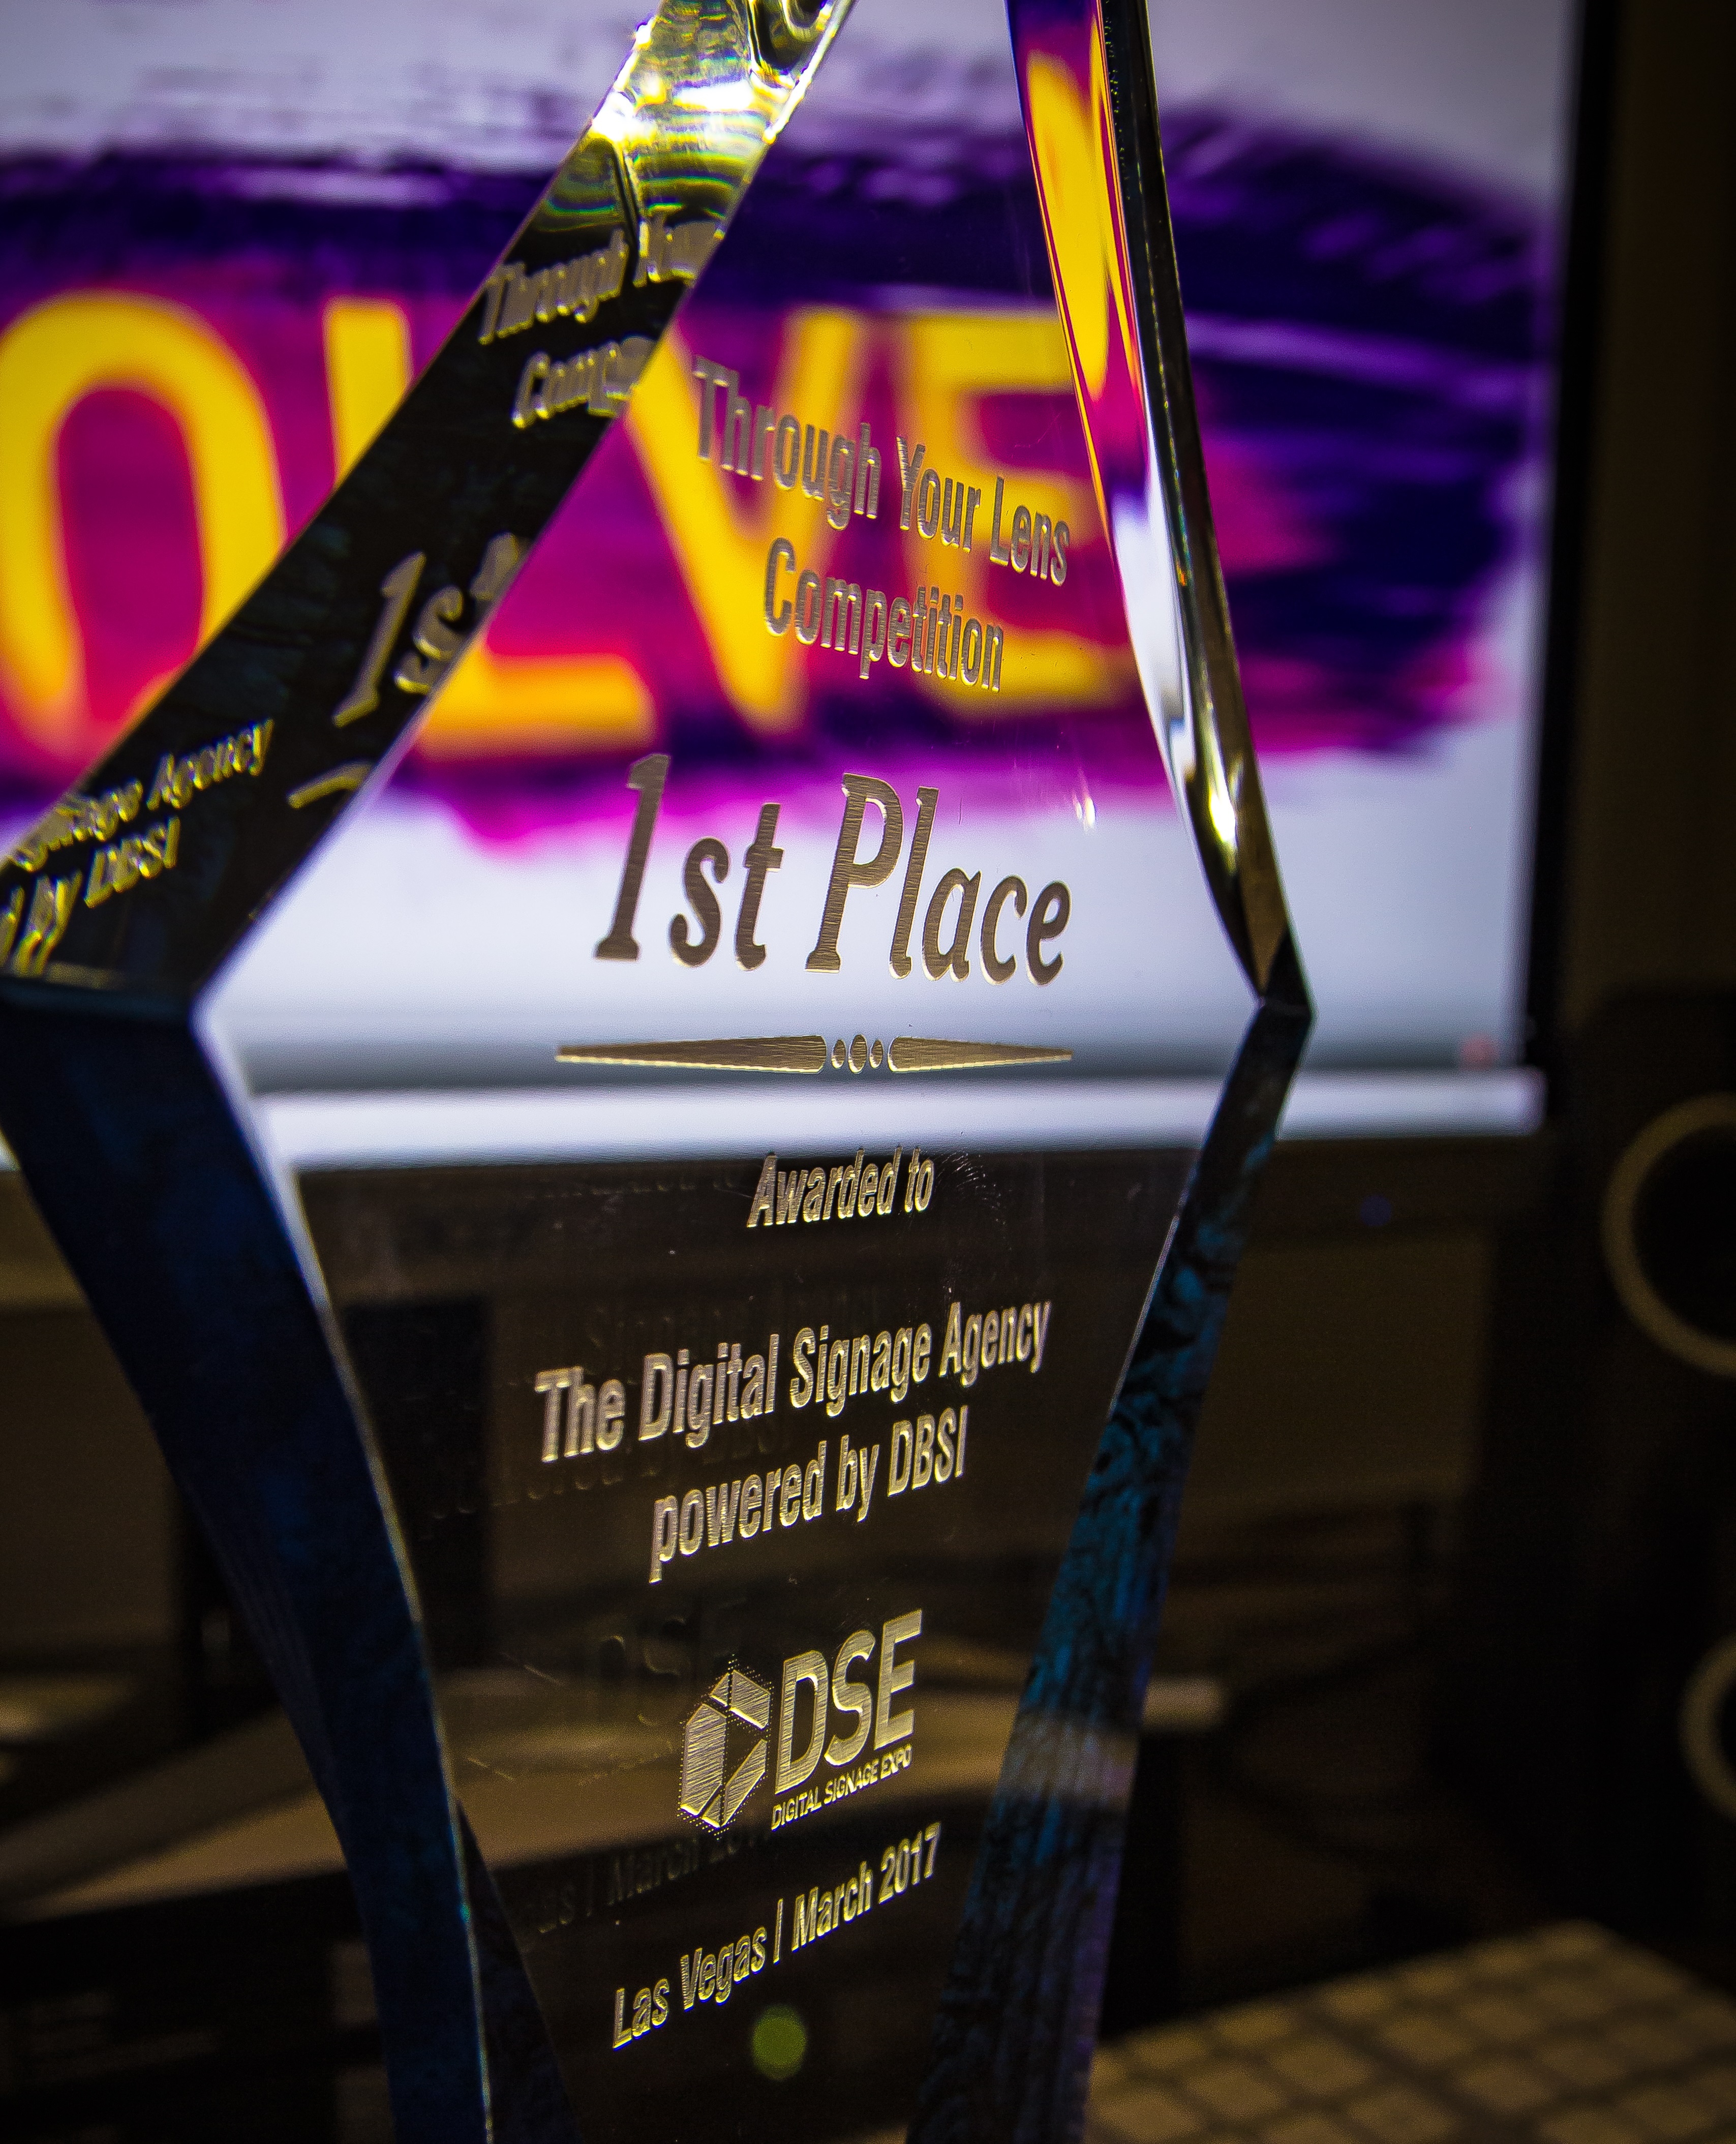 DBSI's Digital Signage Agency Takes Top Spot in Video Contest